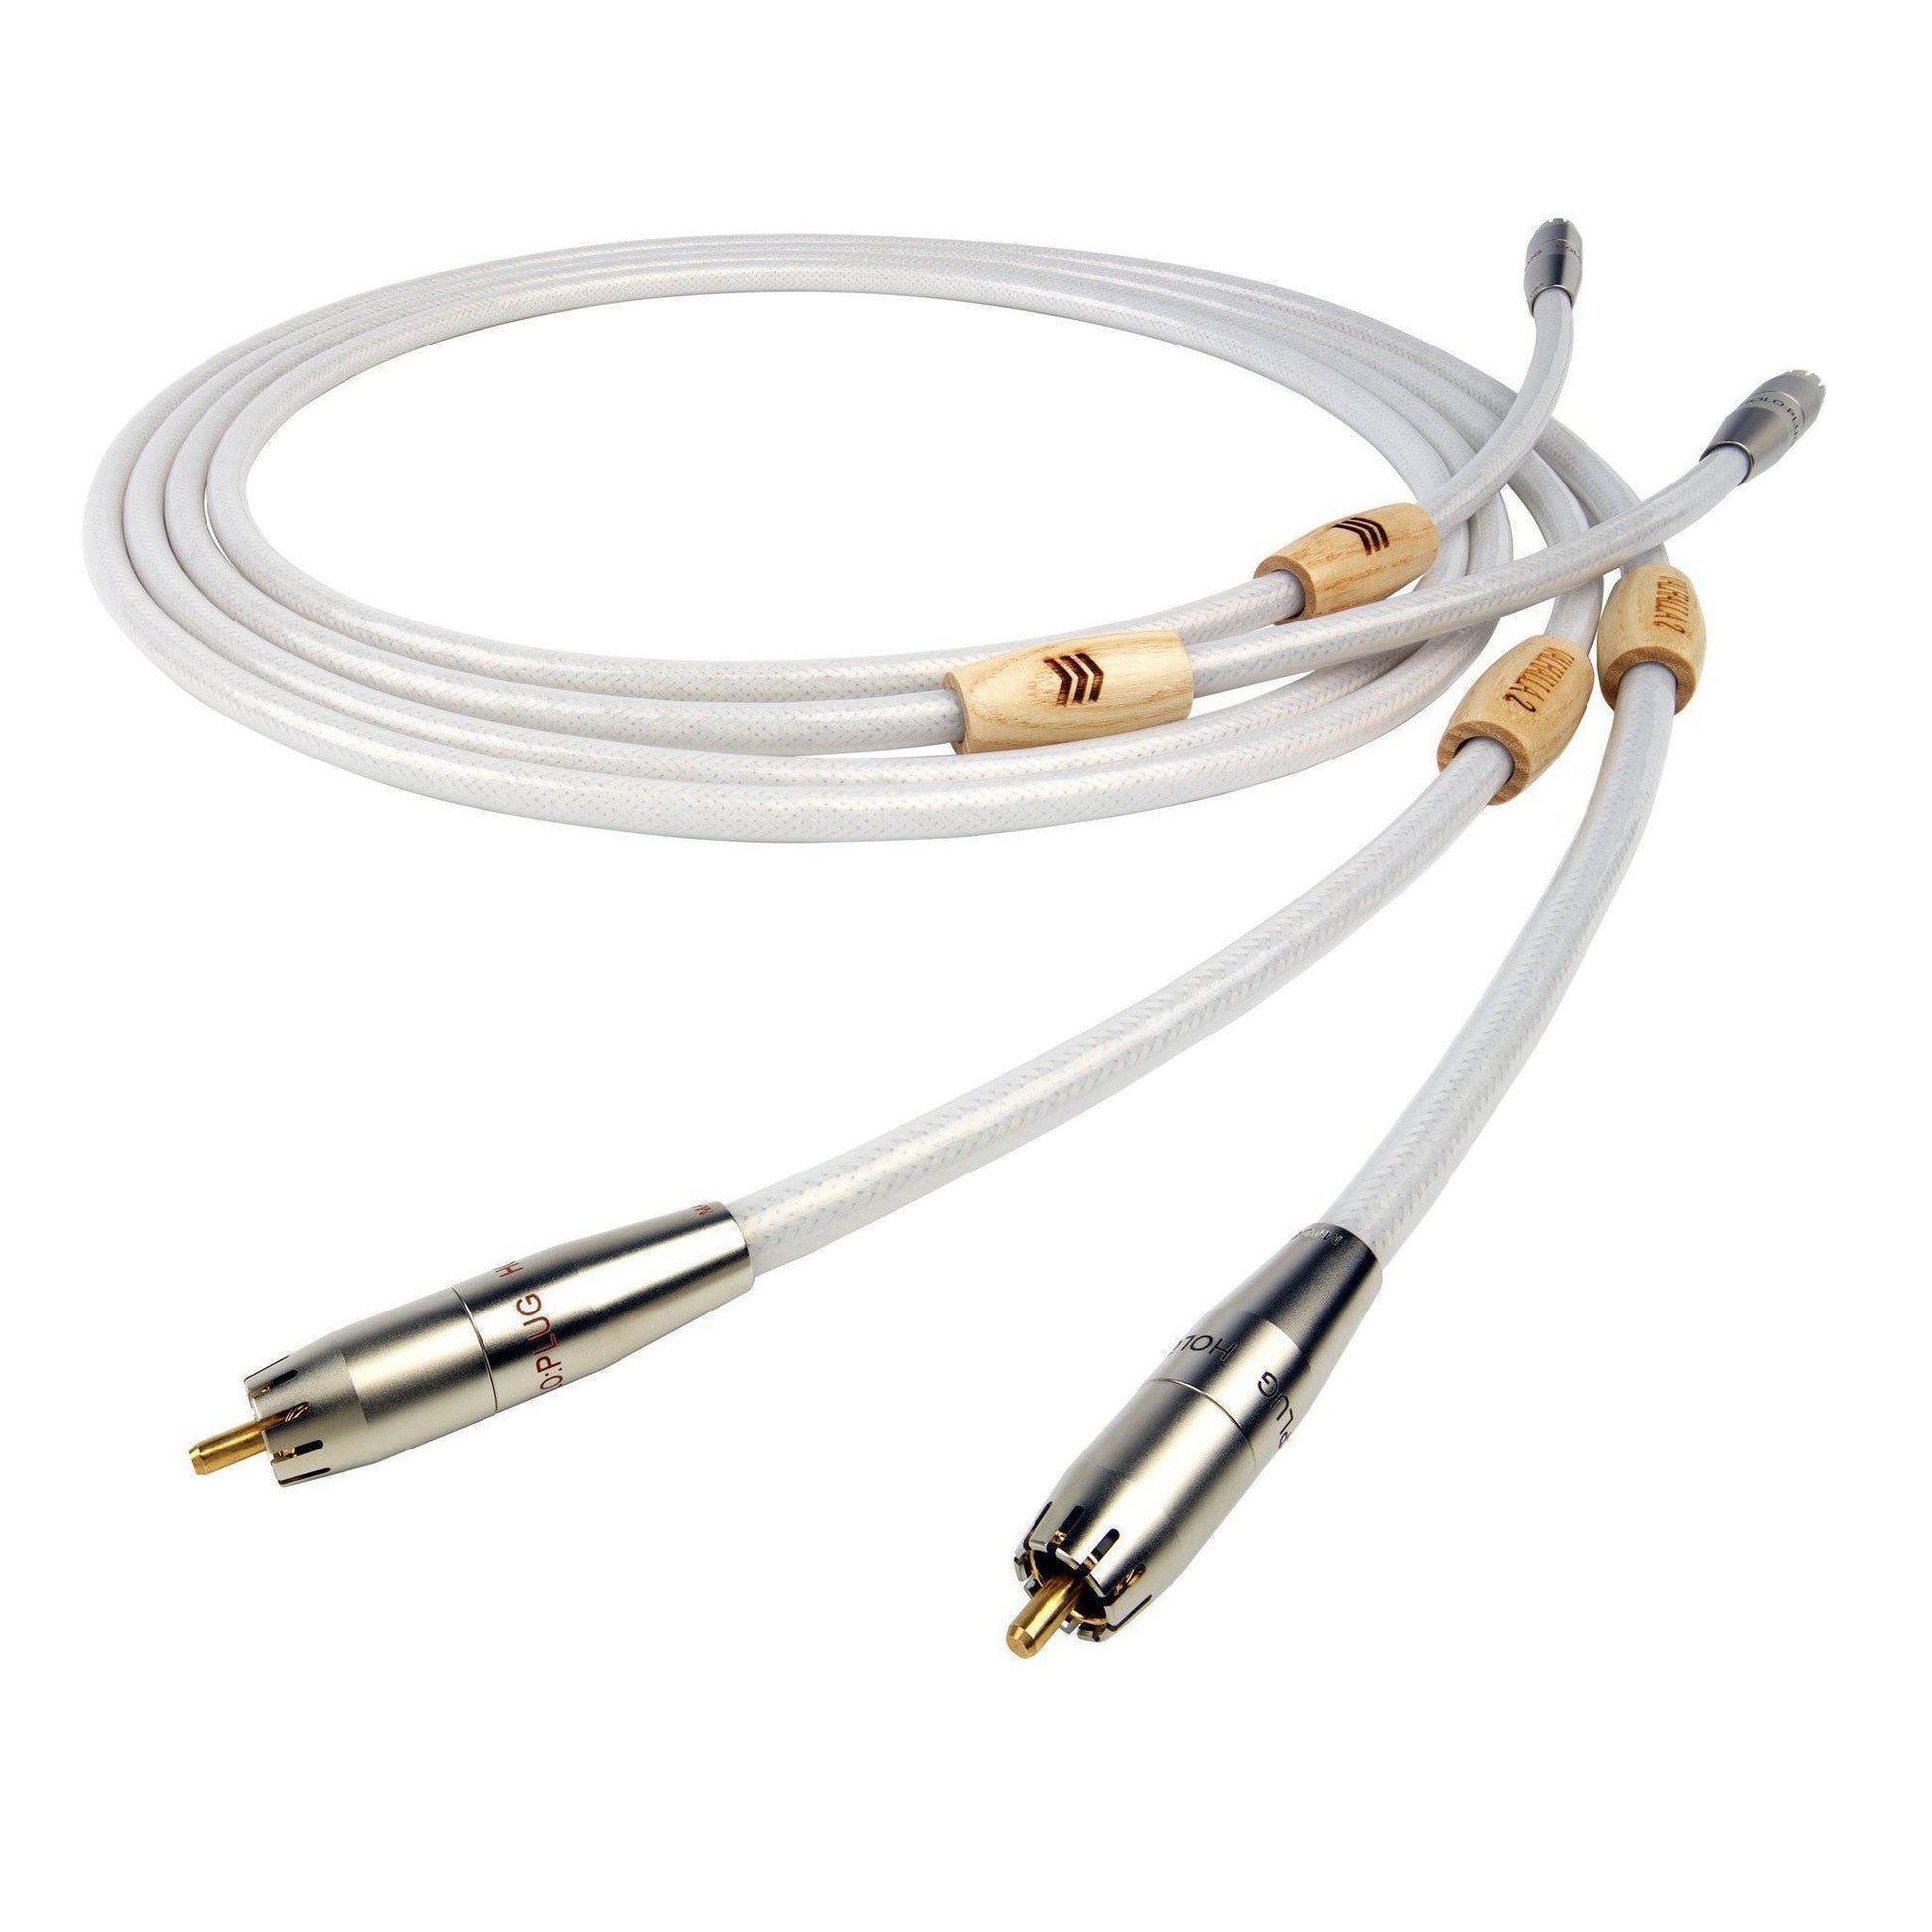 Nordost Valhalla 2 Reference Interconnect